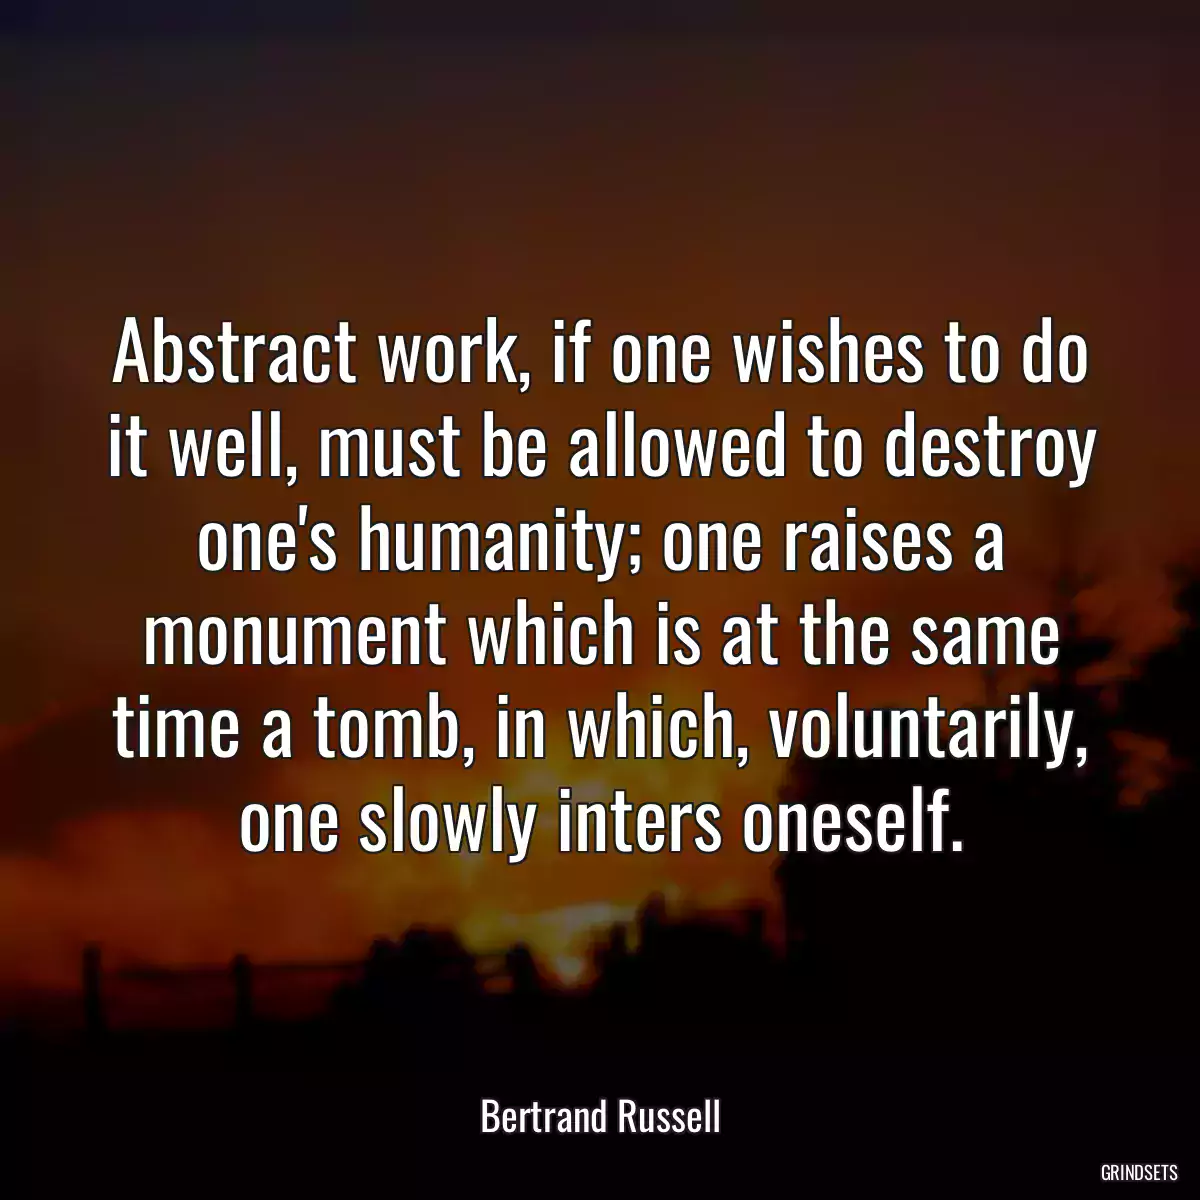 Abstract work, if one wishes to do it well, must be allowed to destroy one\'s humanity; one raises a monument which is at the same time a tomb, in which, voluntarily, one slowly inters oneself.